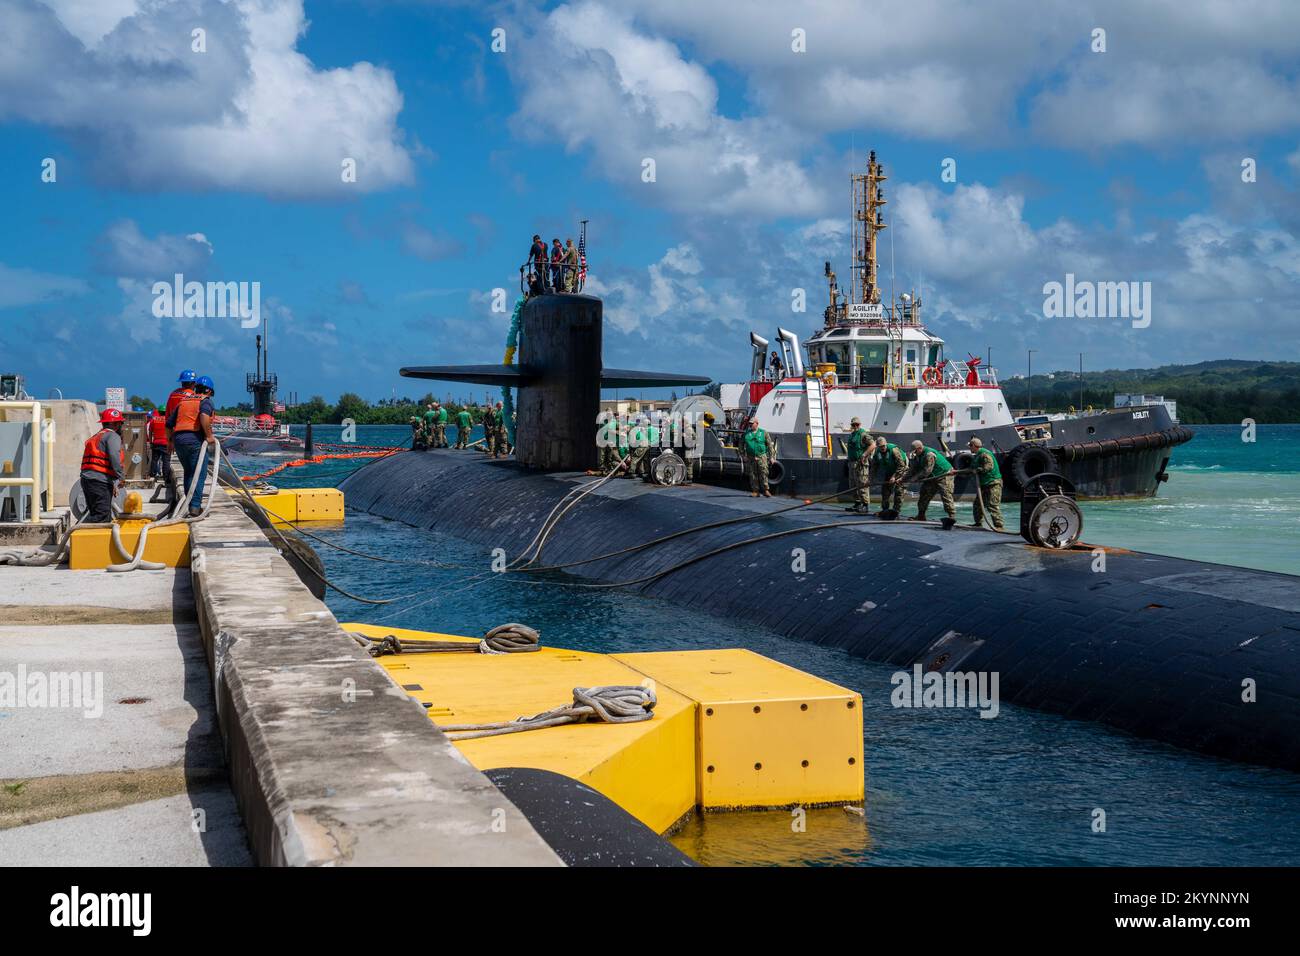 Apra Harbor, United States. 30 November, 2022. The U.S. Navy Los Angeles-class fast attack submarine USS Key West transits Apra Harbor as it returns to Naval Base Guam following a scheduled deployment, November 18, 2022 in Apra Harbor, Guam.  Credit: Lt. Eric Uhden/U.S. Navy/Alamy Live News Stock Photo